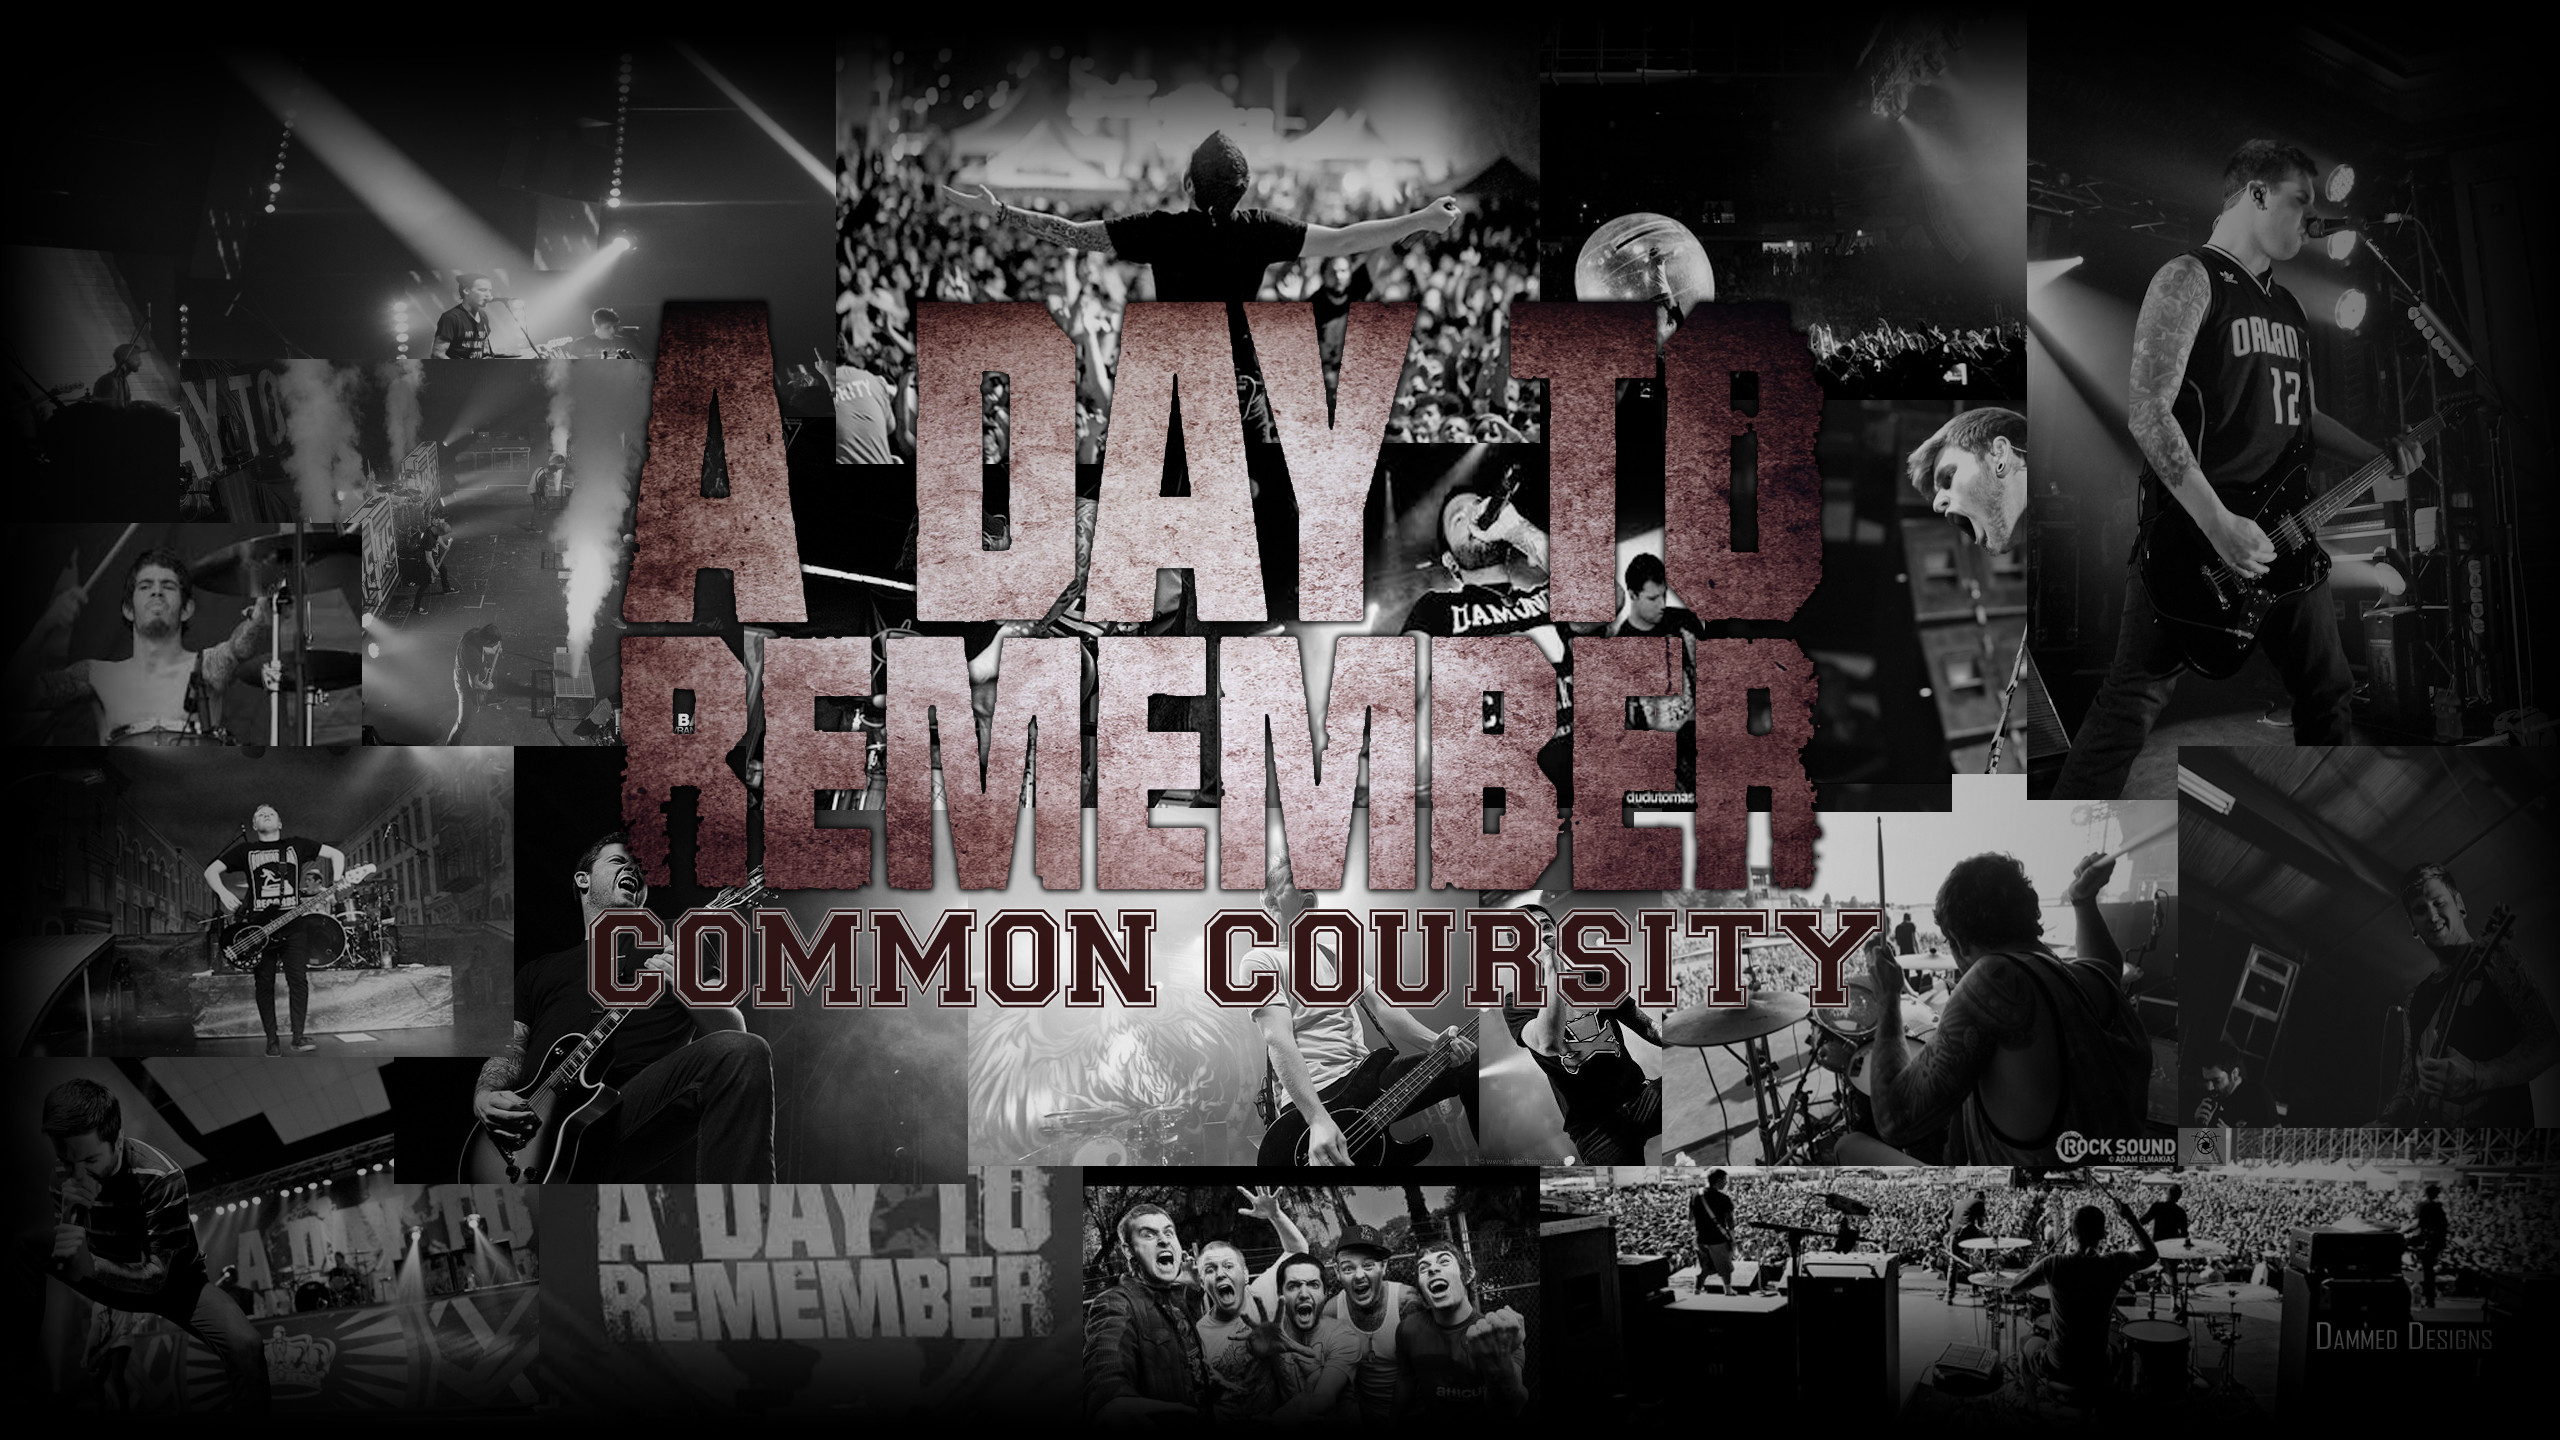 2560x1440 A DAY TO REMEMBER - WALLPAPER By Damneddesign On DeviantArt